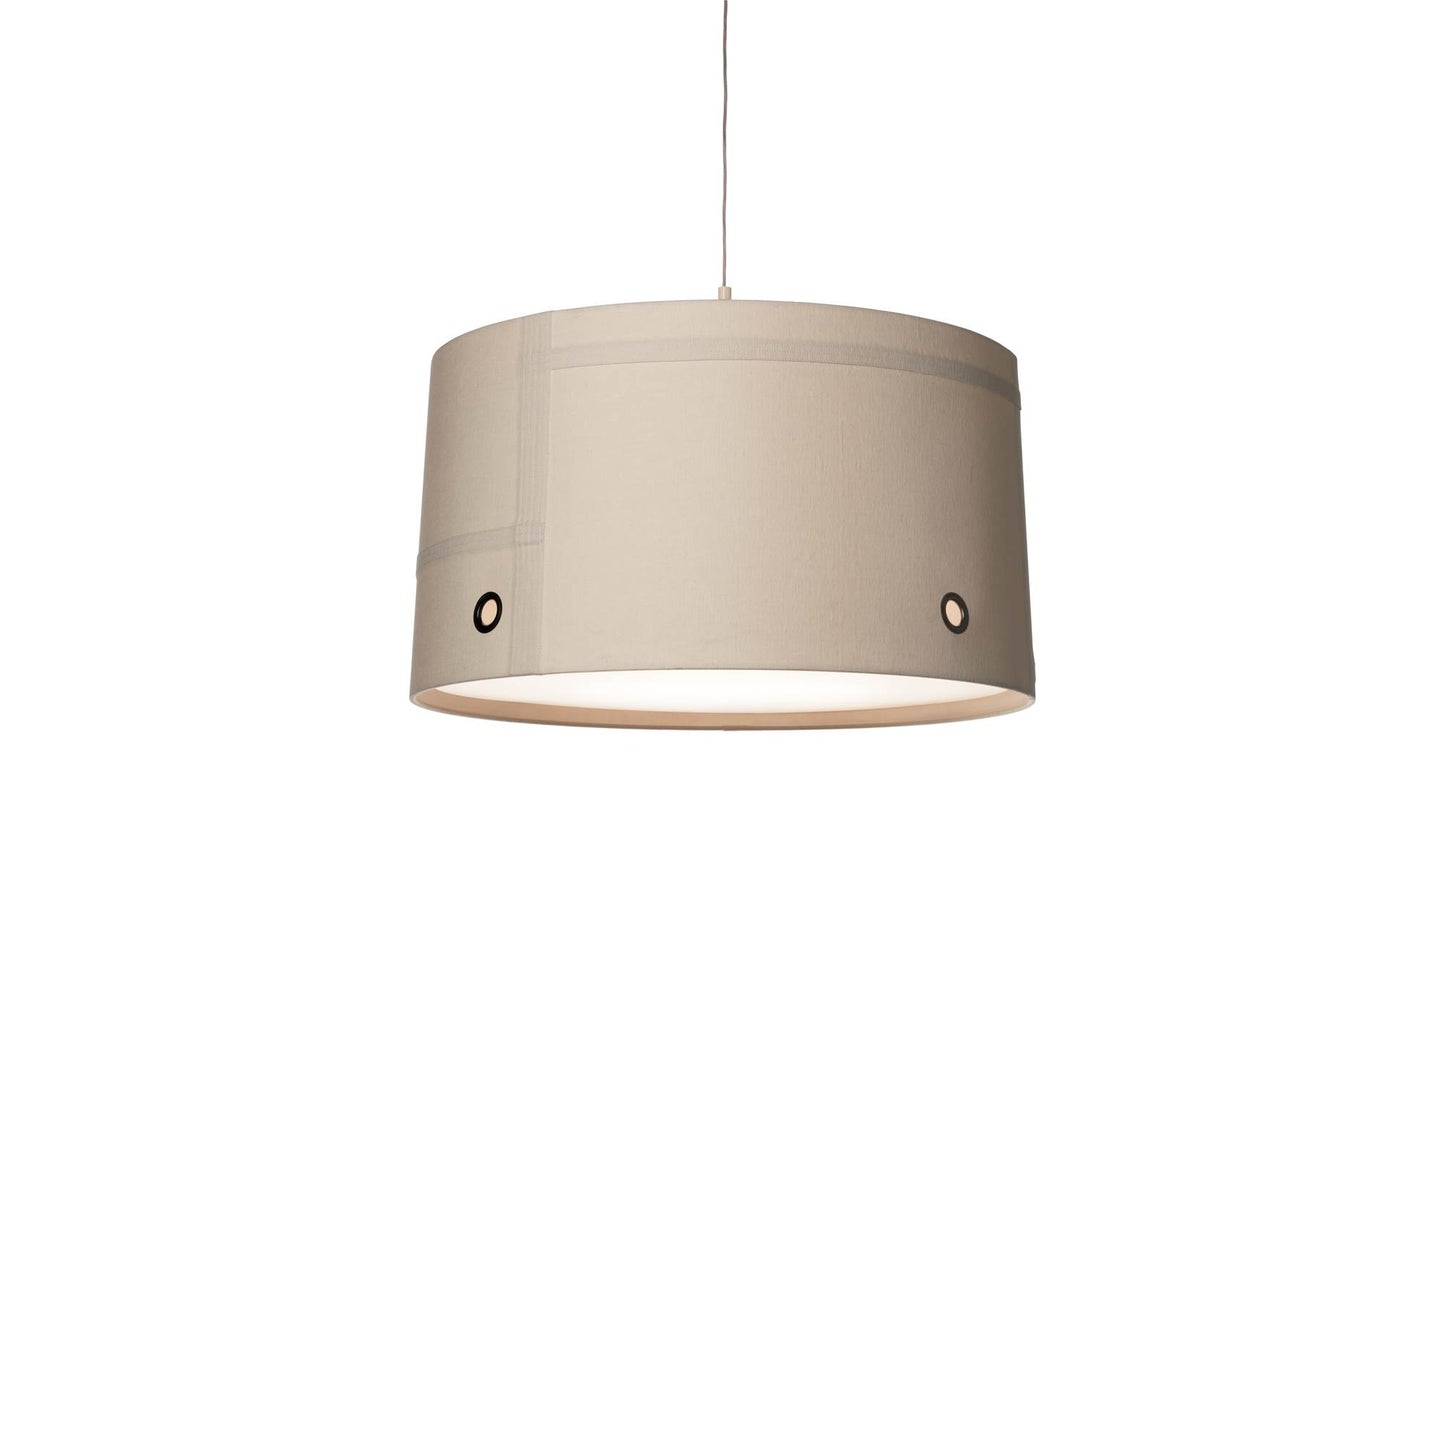 Diesel with Foscarini Fork XL Pendant, Satin PMMA & Varnished Steel in Ivory